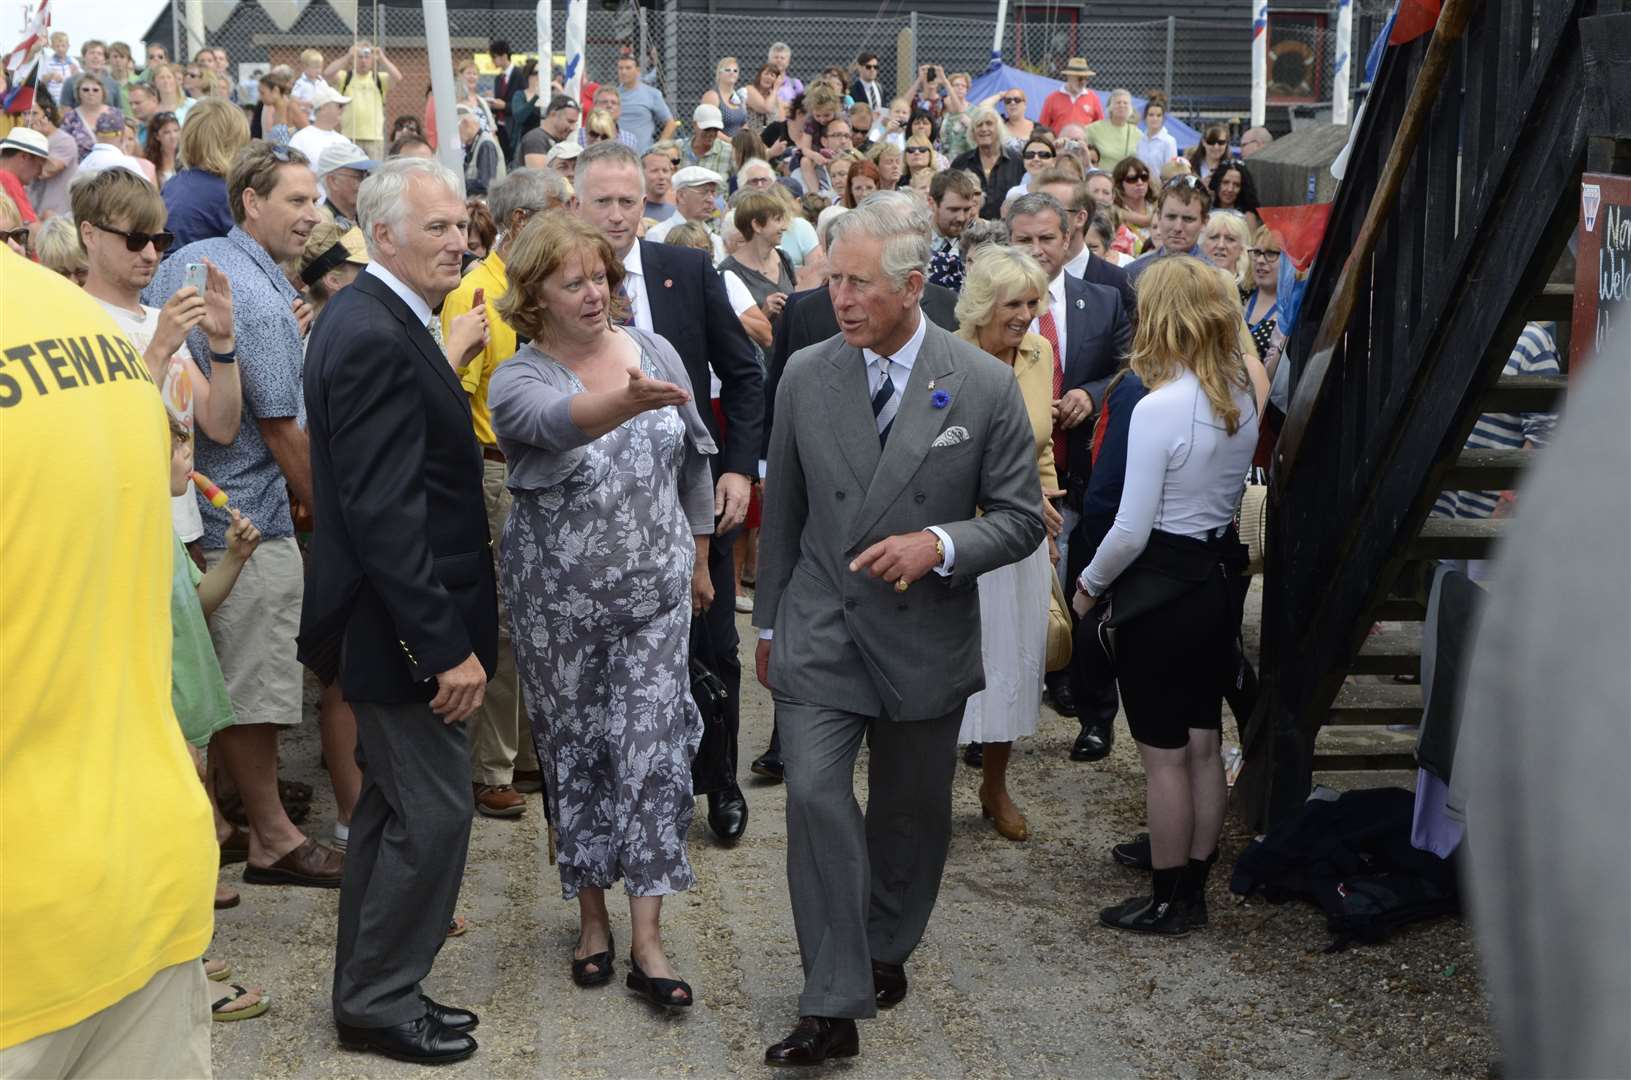 Prince Charles and the Duchess of Cornwall visiting Whitstable Oyster FestivalPicture: Gary BrowneKMG/Royal Rota FM2721766 (7504795)